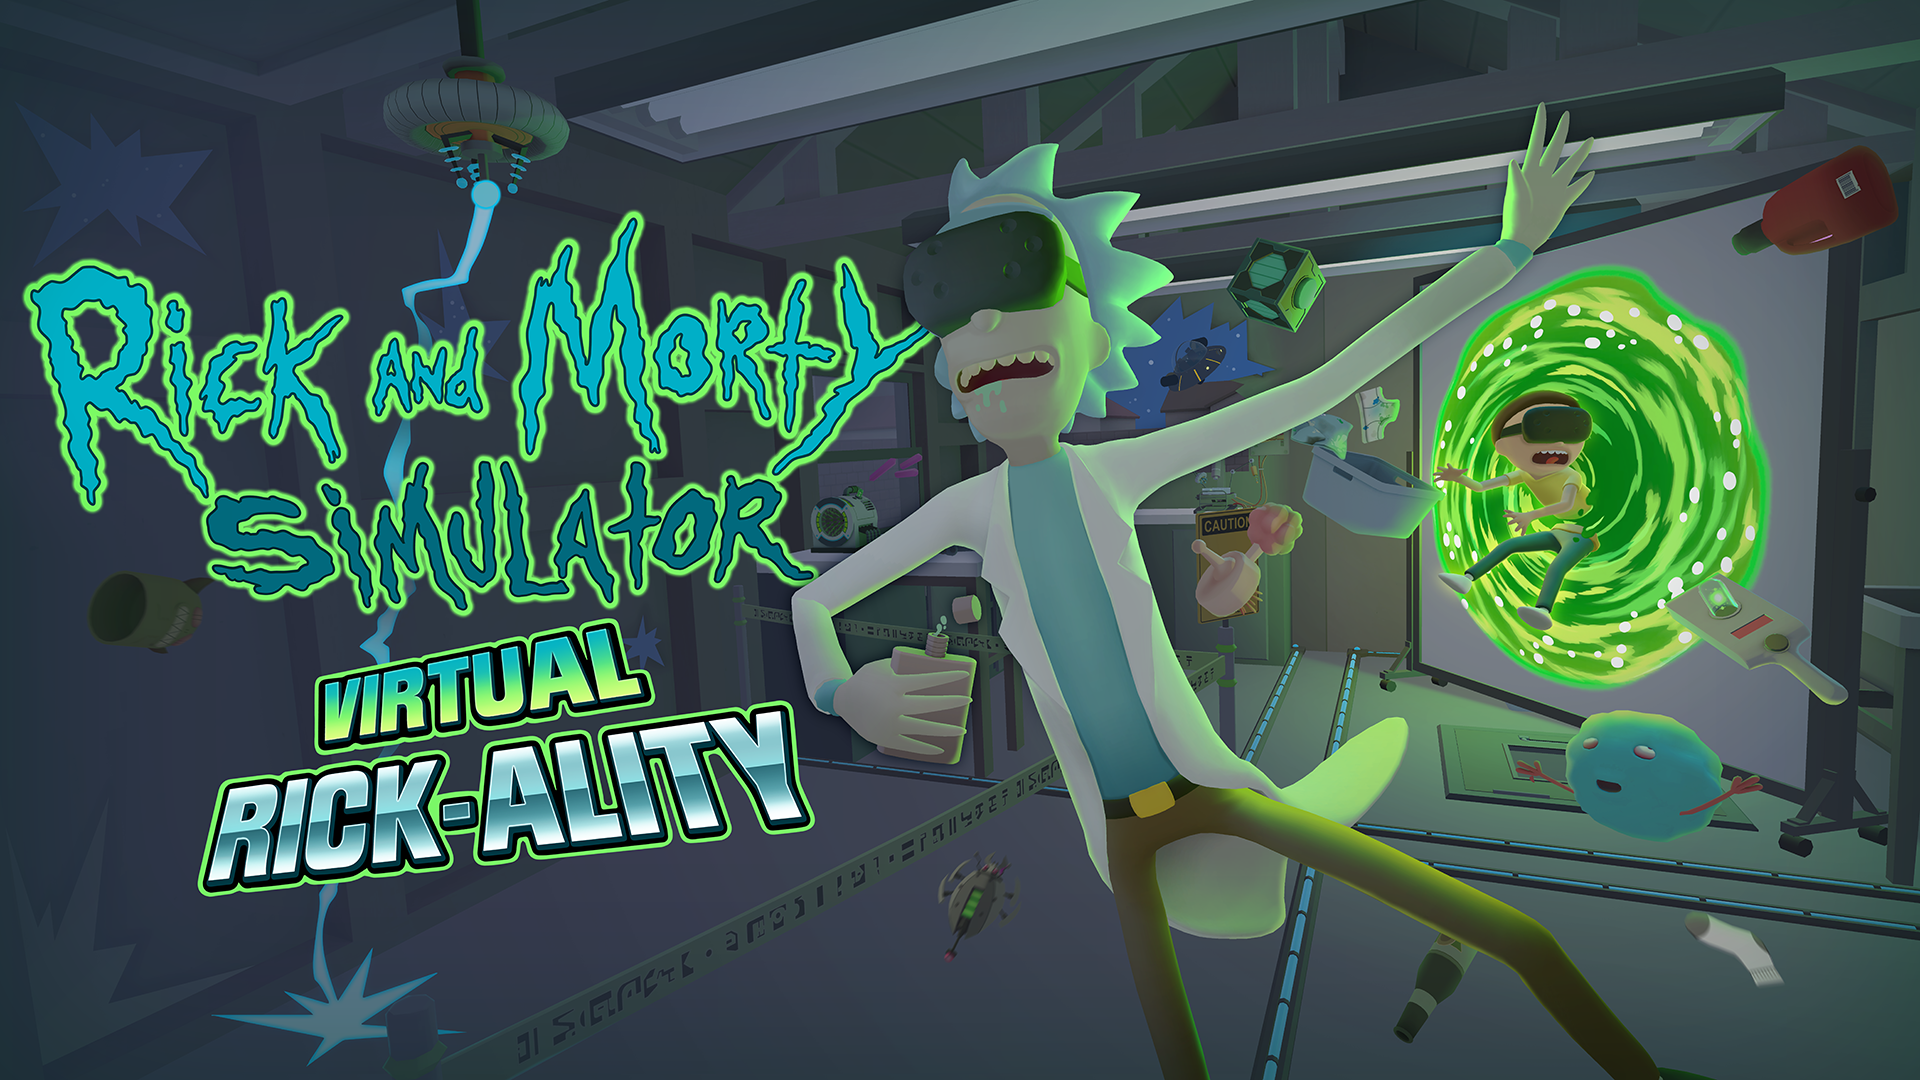 Image for The Rick and Morty VR game is out now if you like your Job Simulator even more off the wall than usual